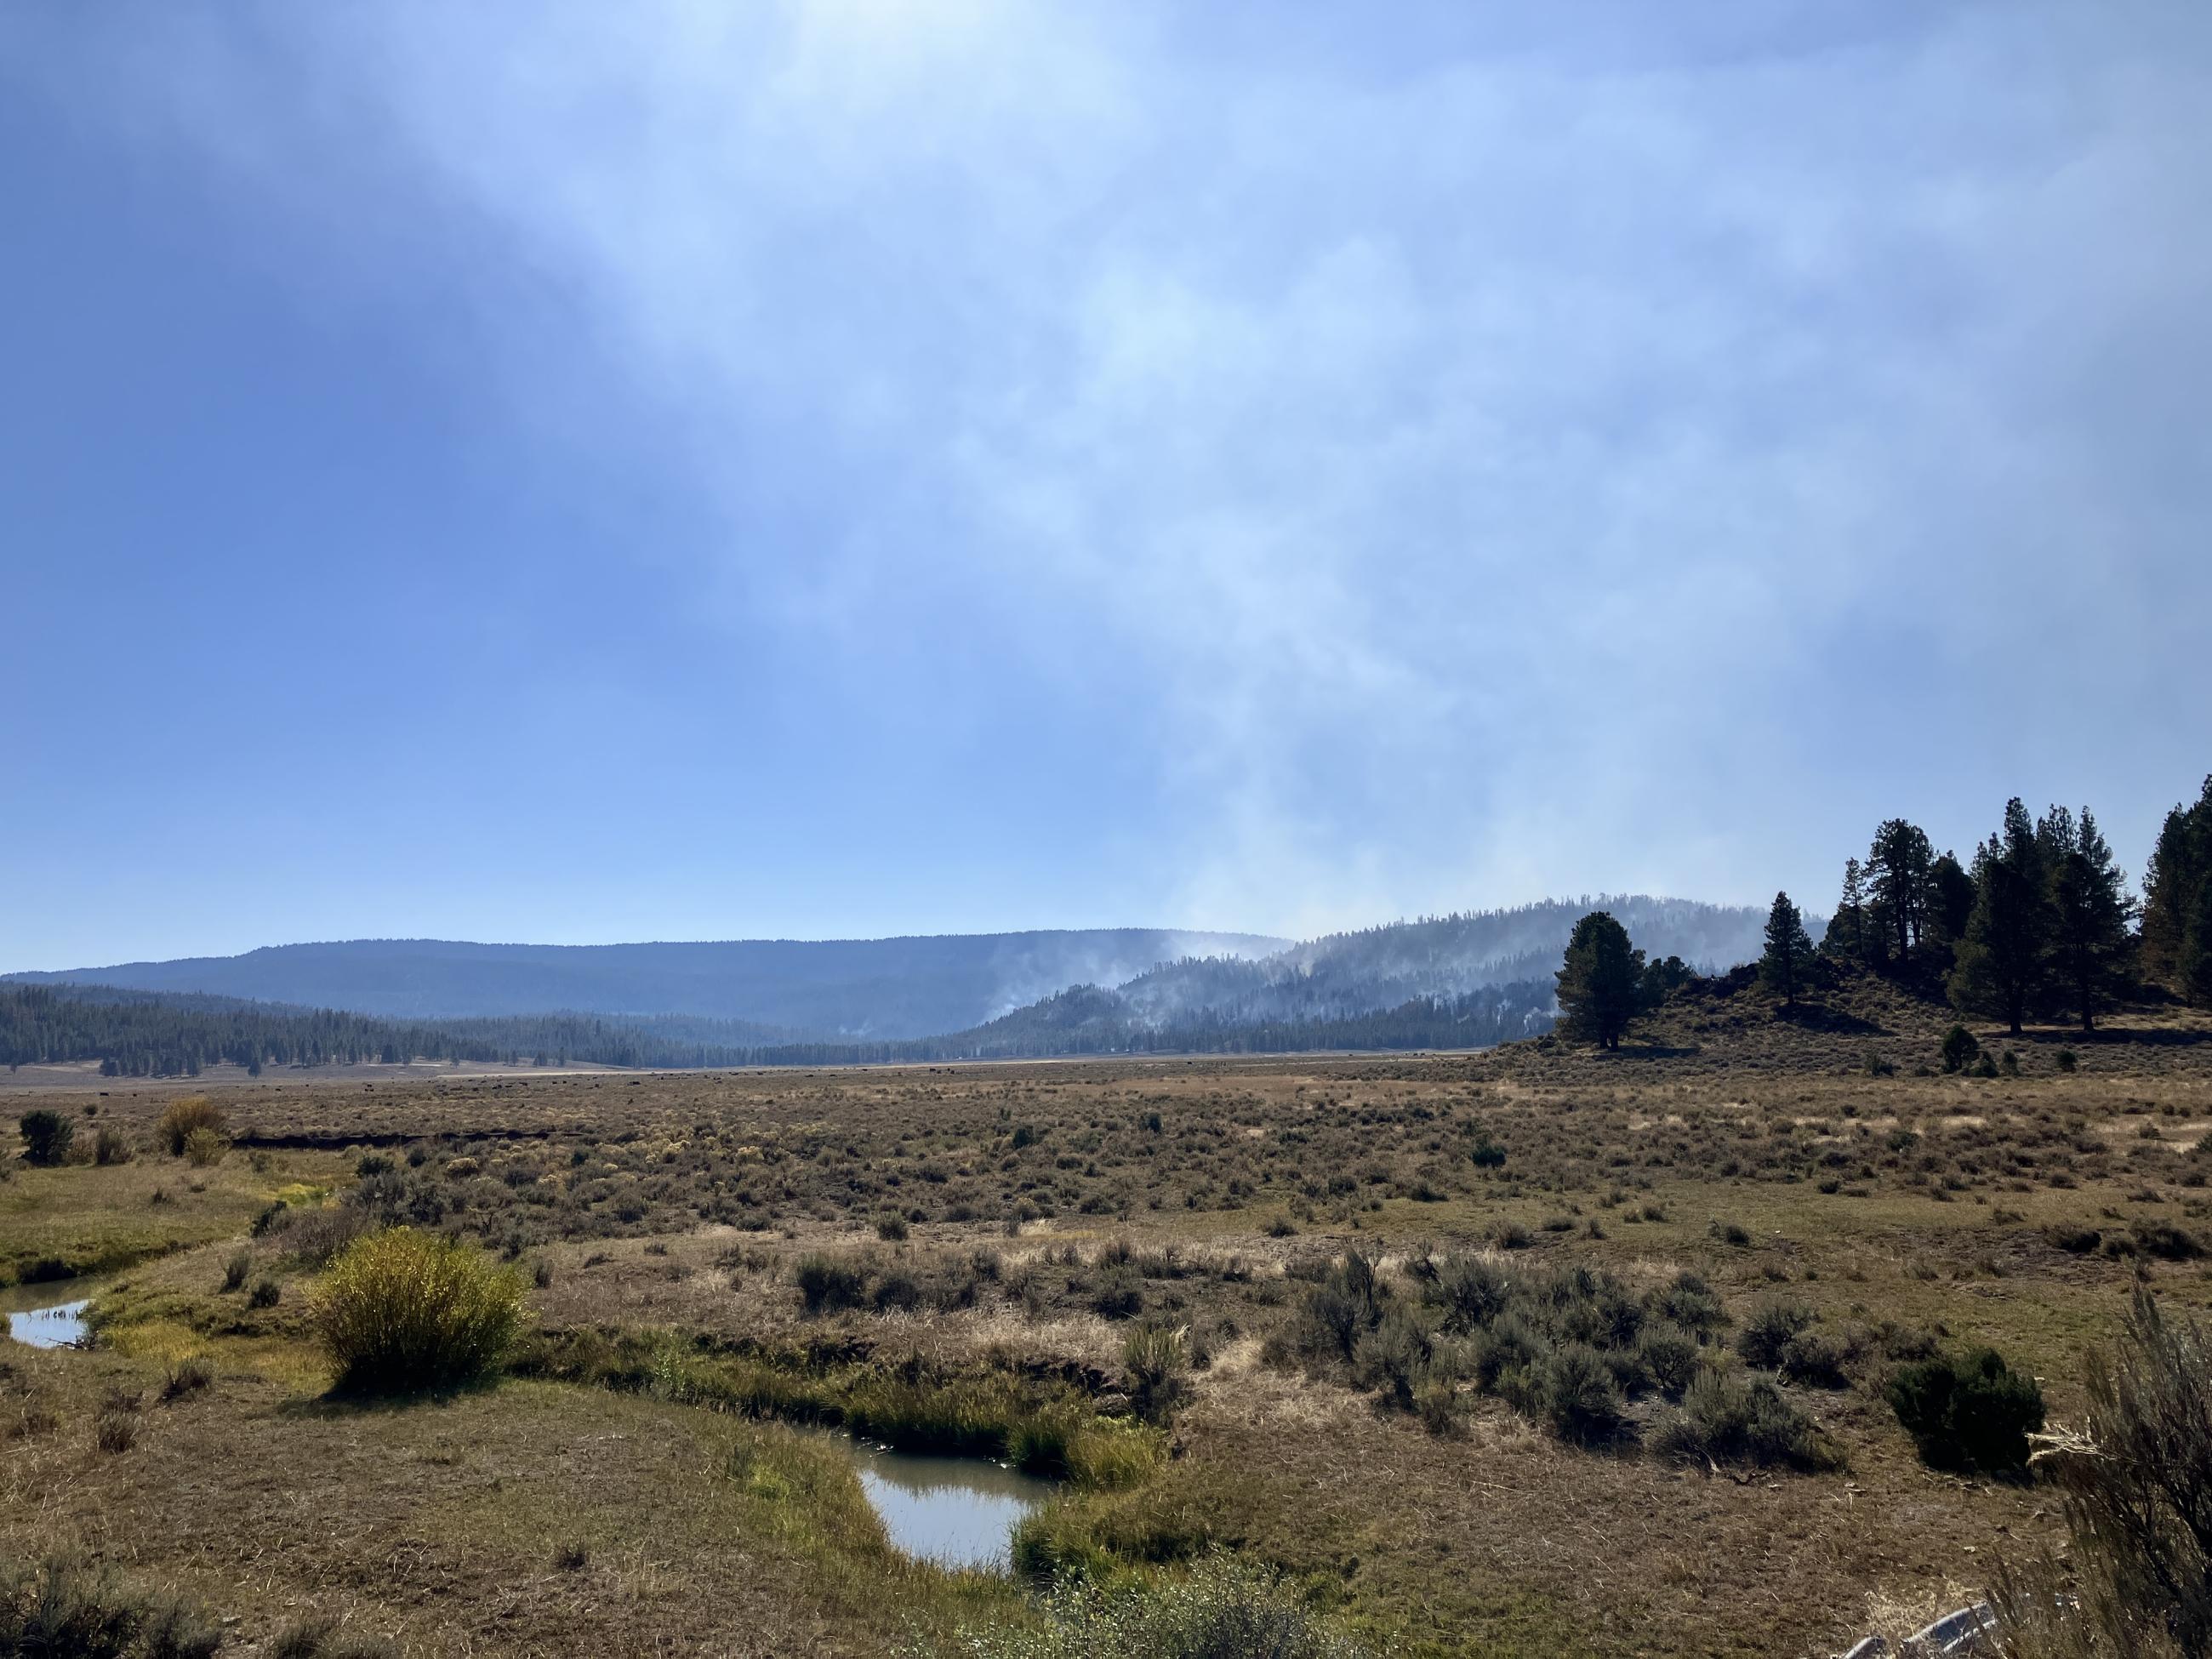 A meandering creek through a large open meadow with large streaks of smoke in the background rising from forested hills.